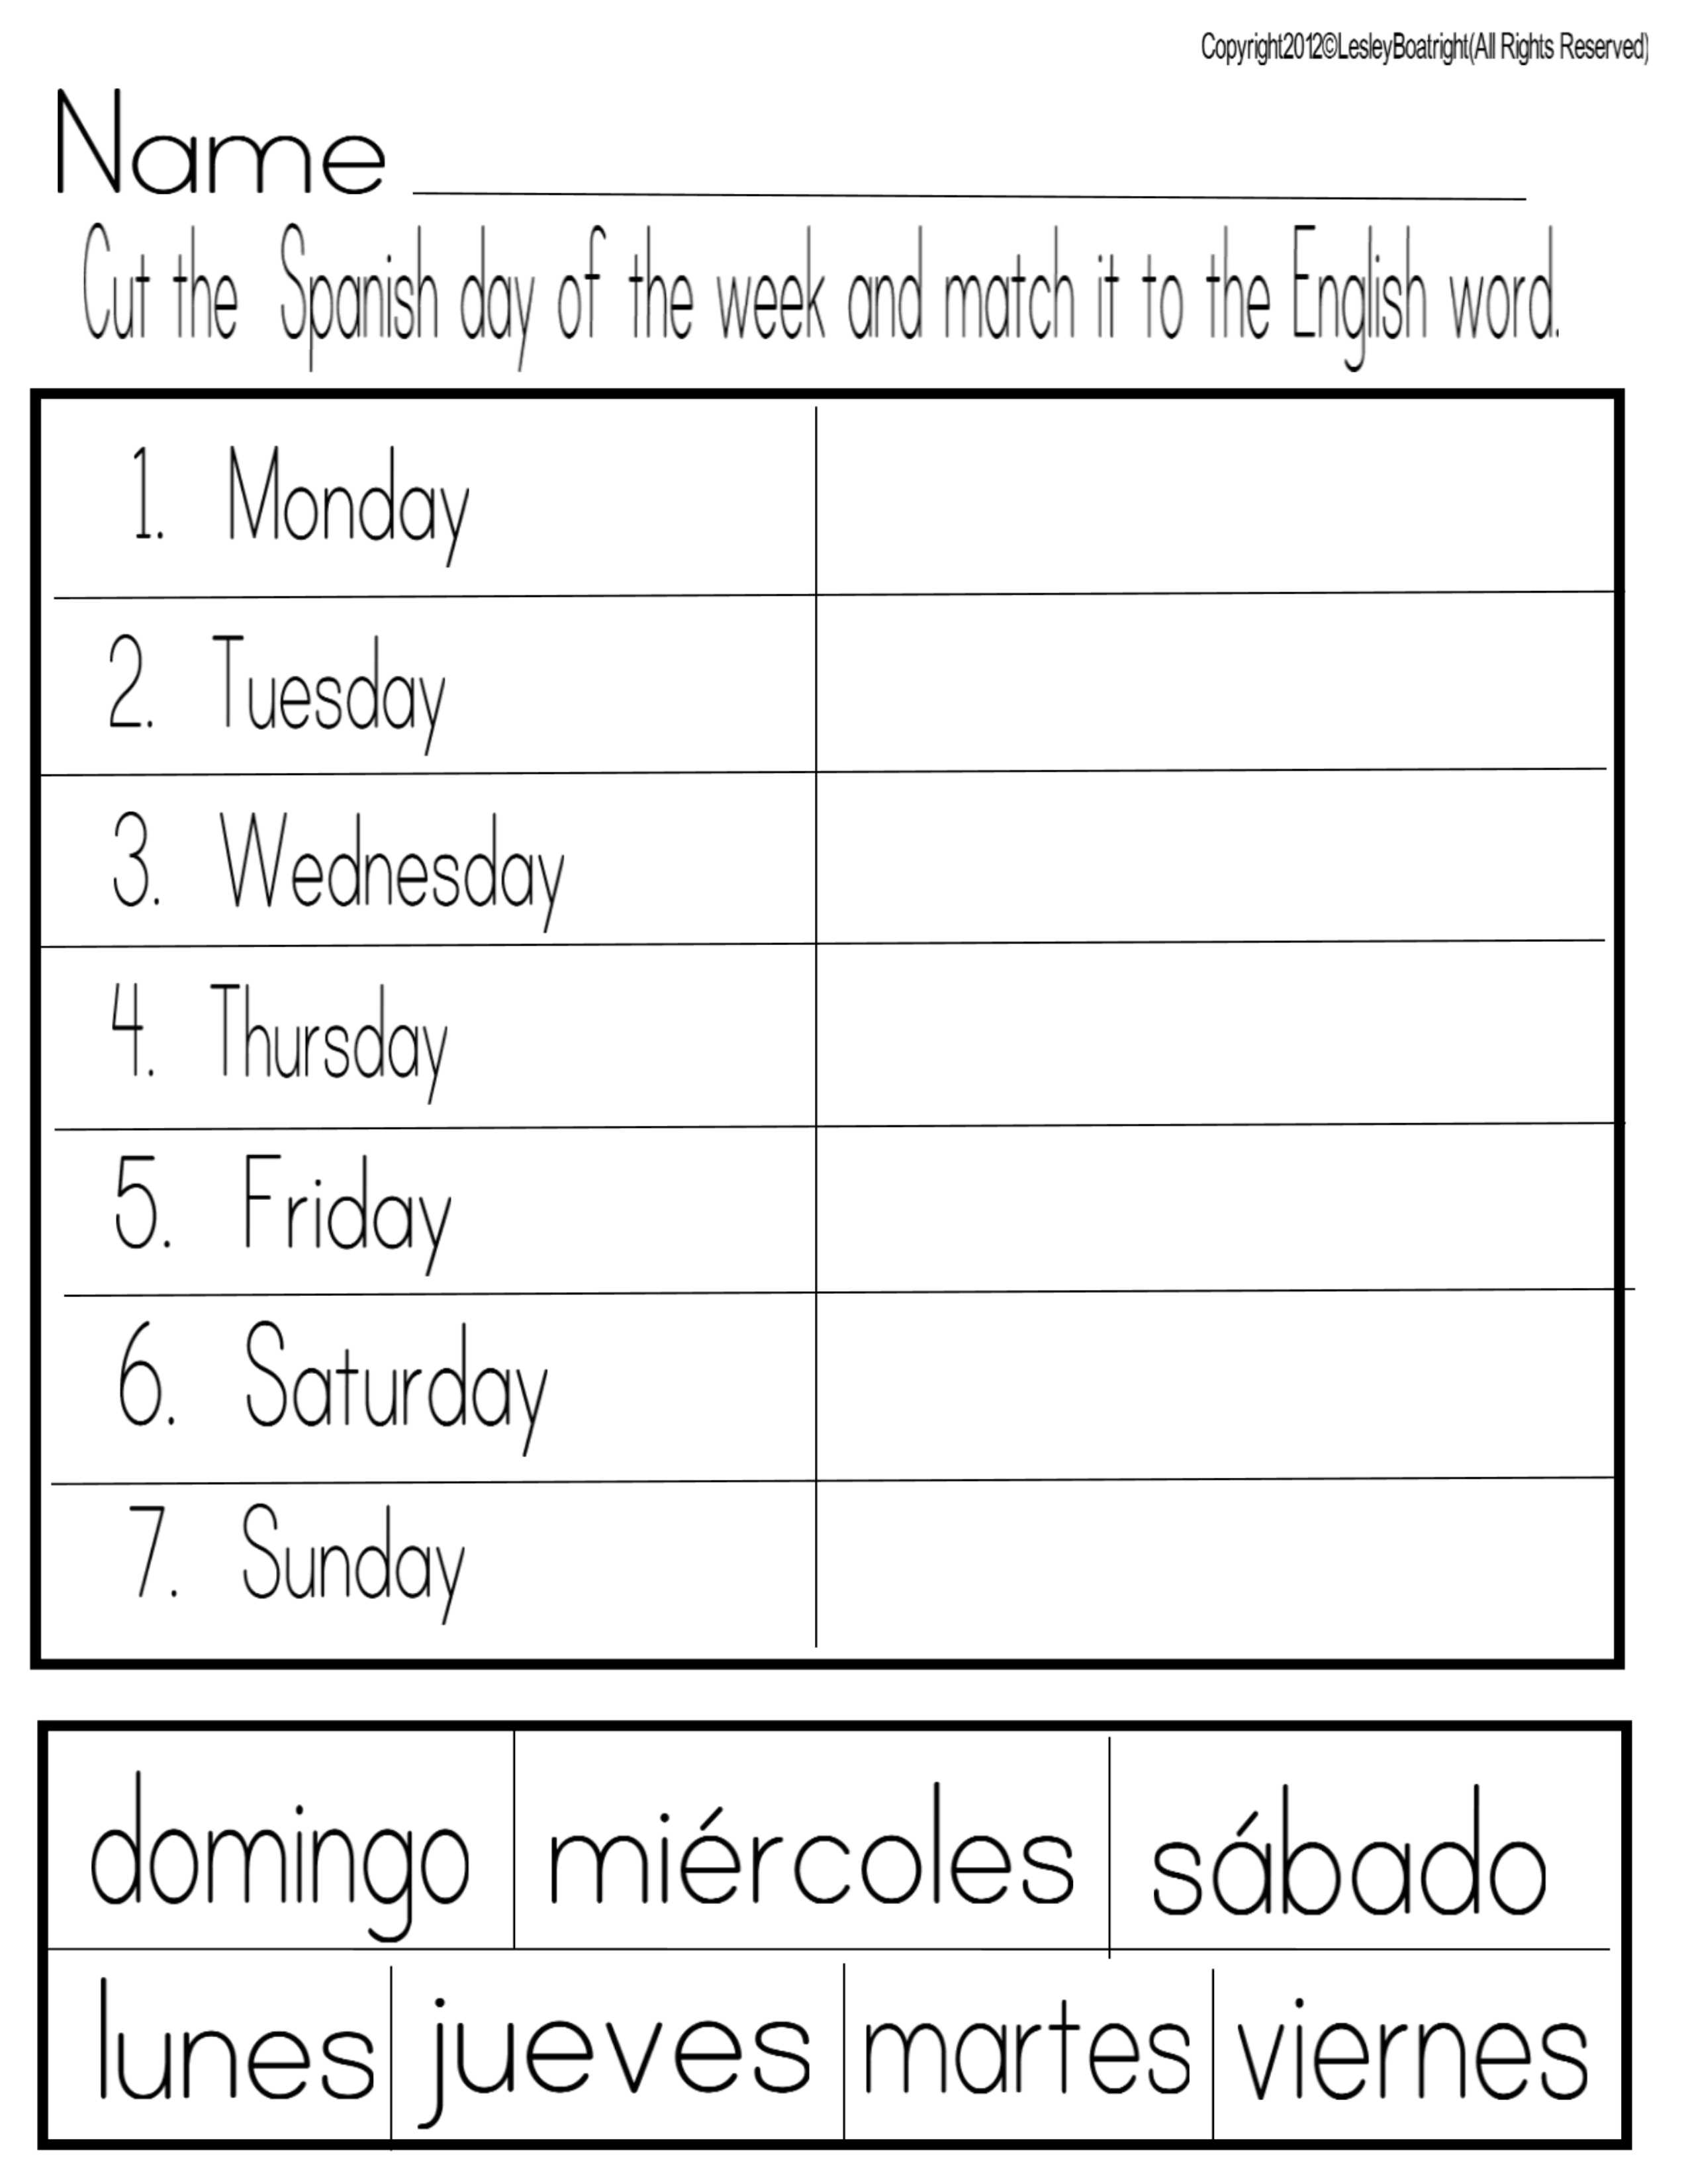 18-best-images-of-student-of-the-week-preschool-worksheets-star-student-of-the-week-ideas-all